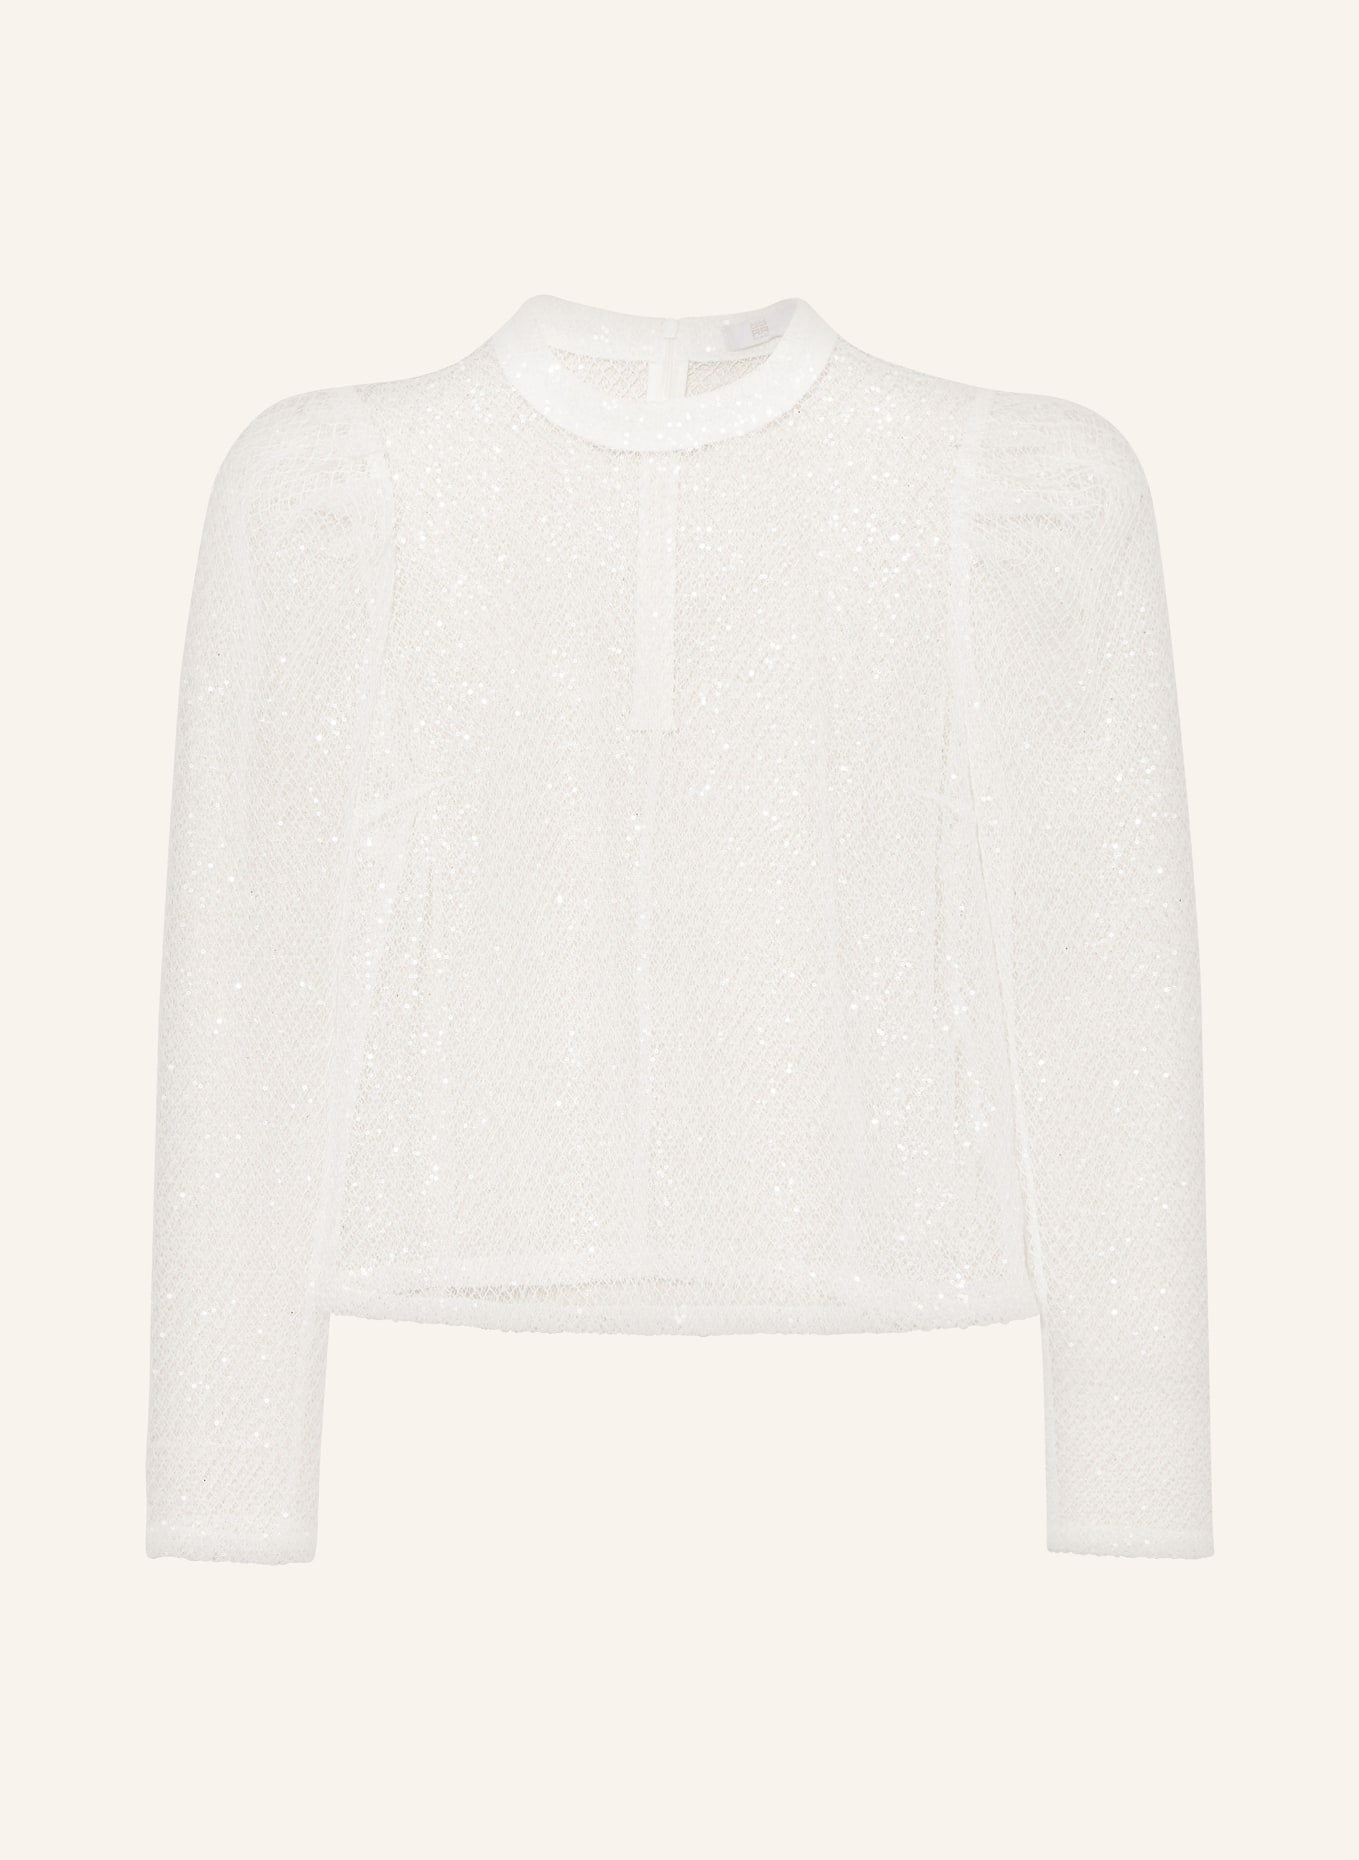 RIANI Shirt blouse with sequins, Color: WHITE (Image 1)